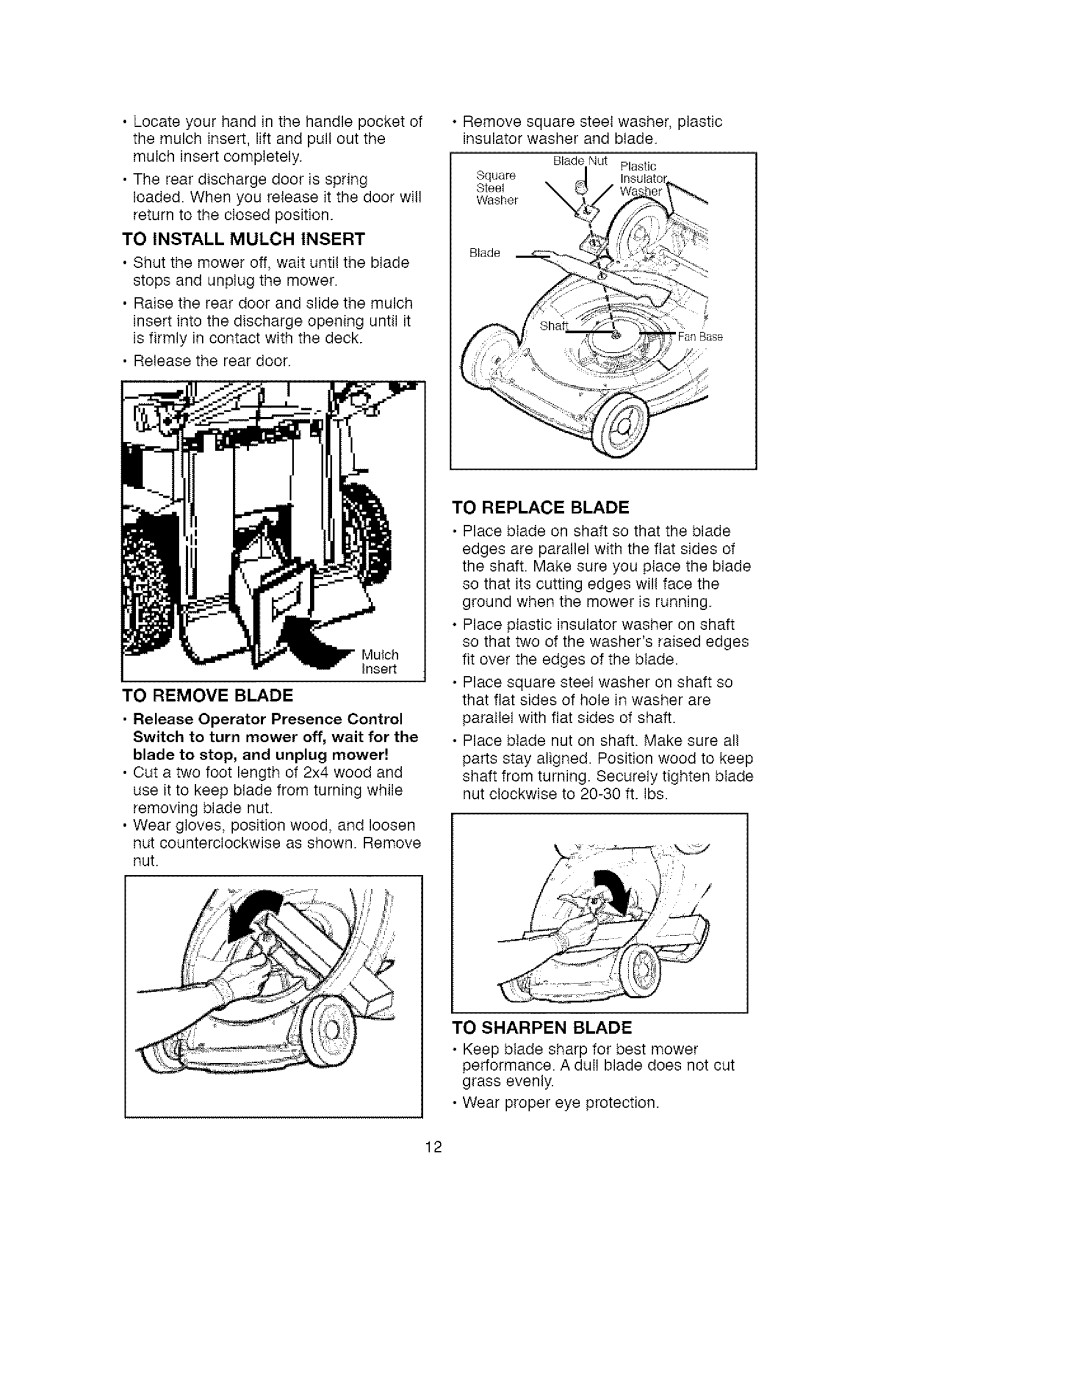 Craftsman 900.370511 manual To Remove Blade, To Replace Blade, To Install Mulch Insert, To Sharpen Blade 